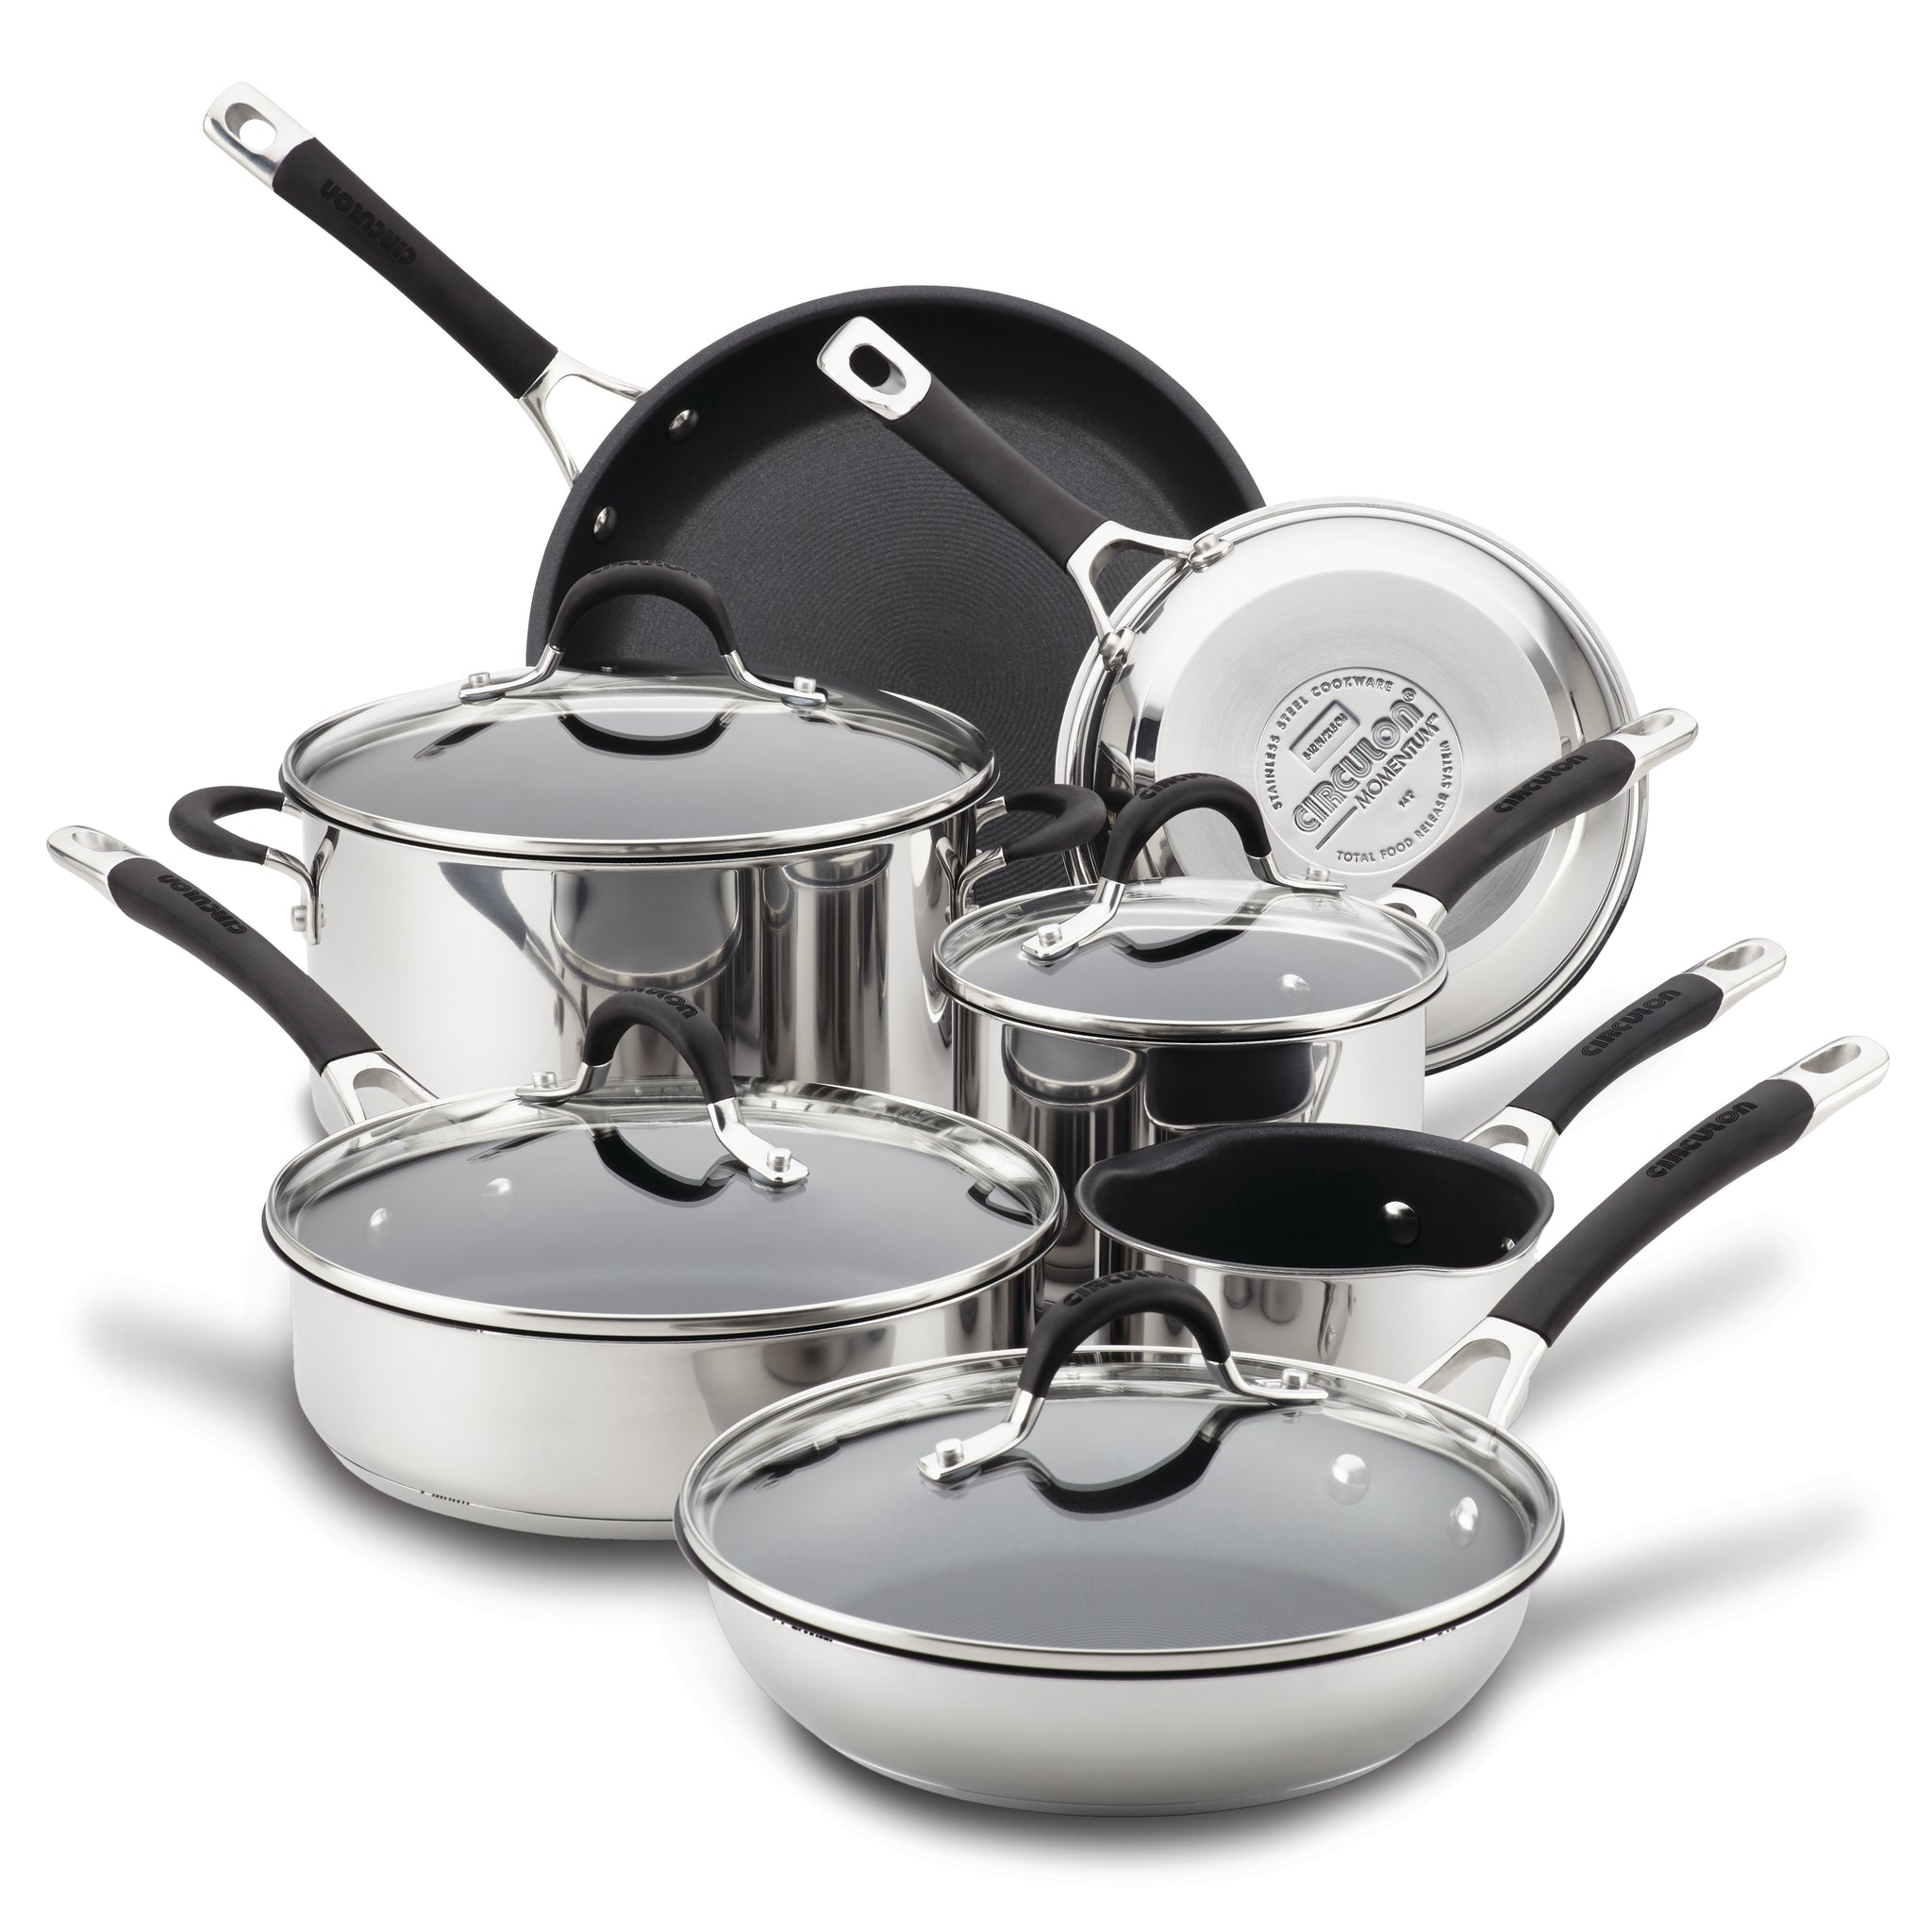 Stainless Steel Nonstick Cookware Set. There are 7 items shown.